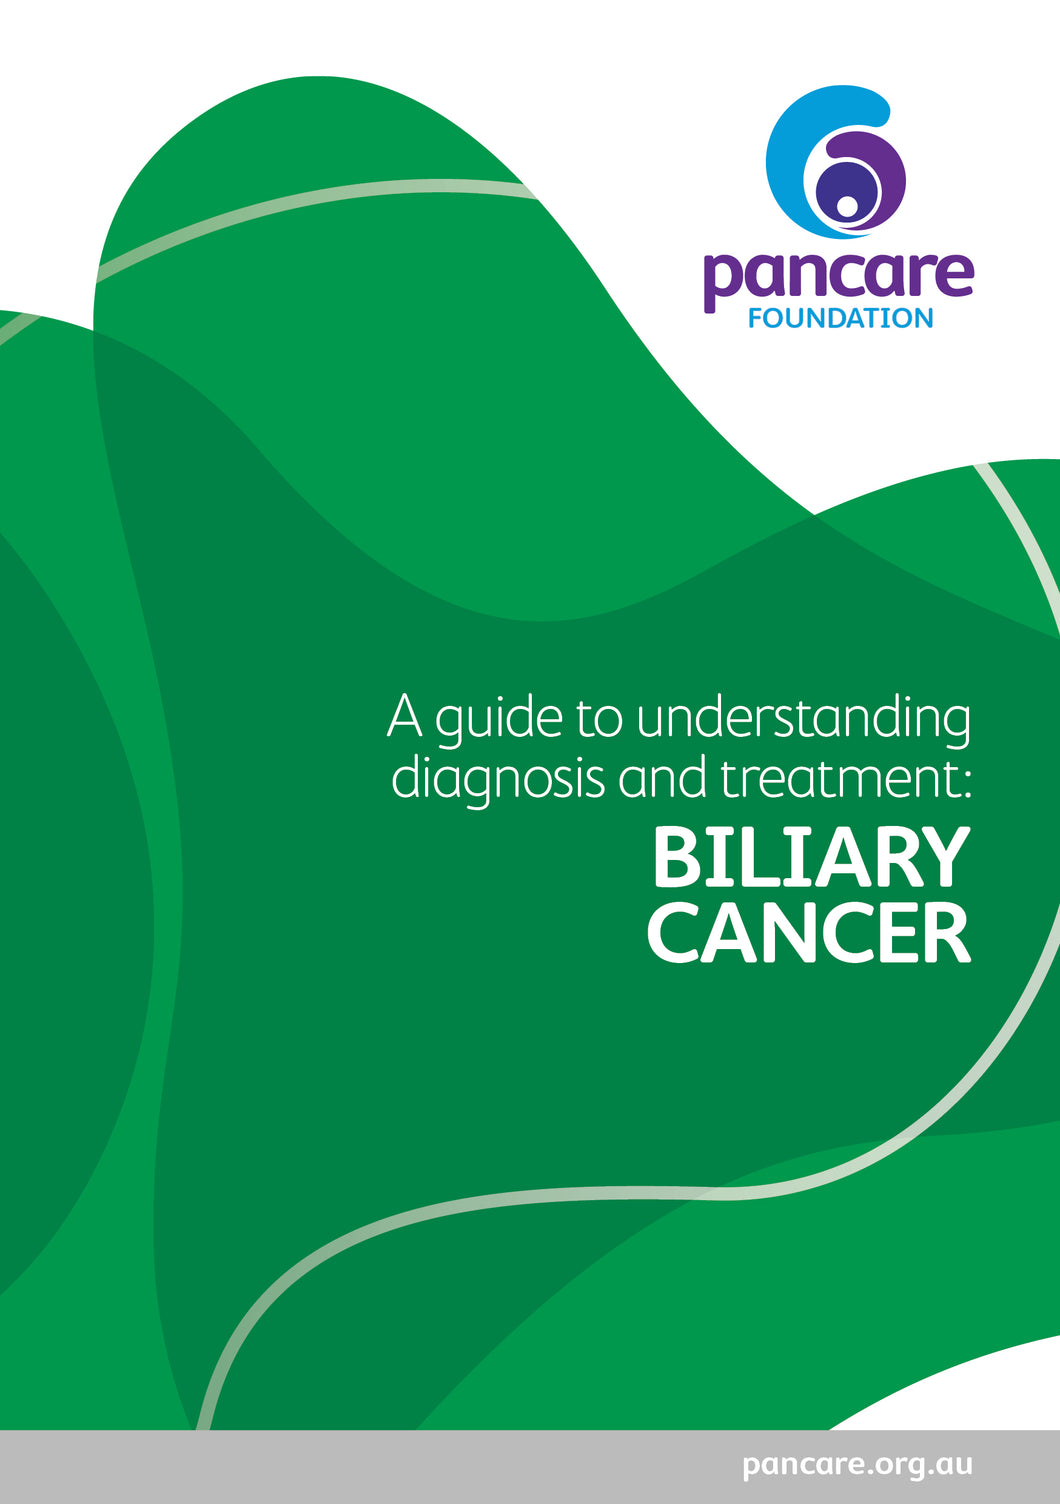 Handbook: A Guide to Understanding Diagnosis and Treatment for Biliary Cancer